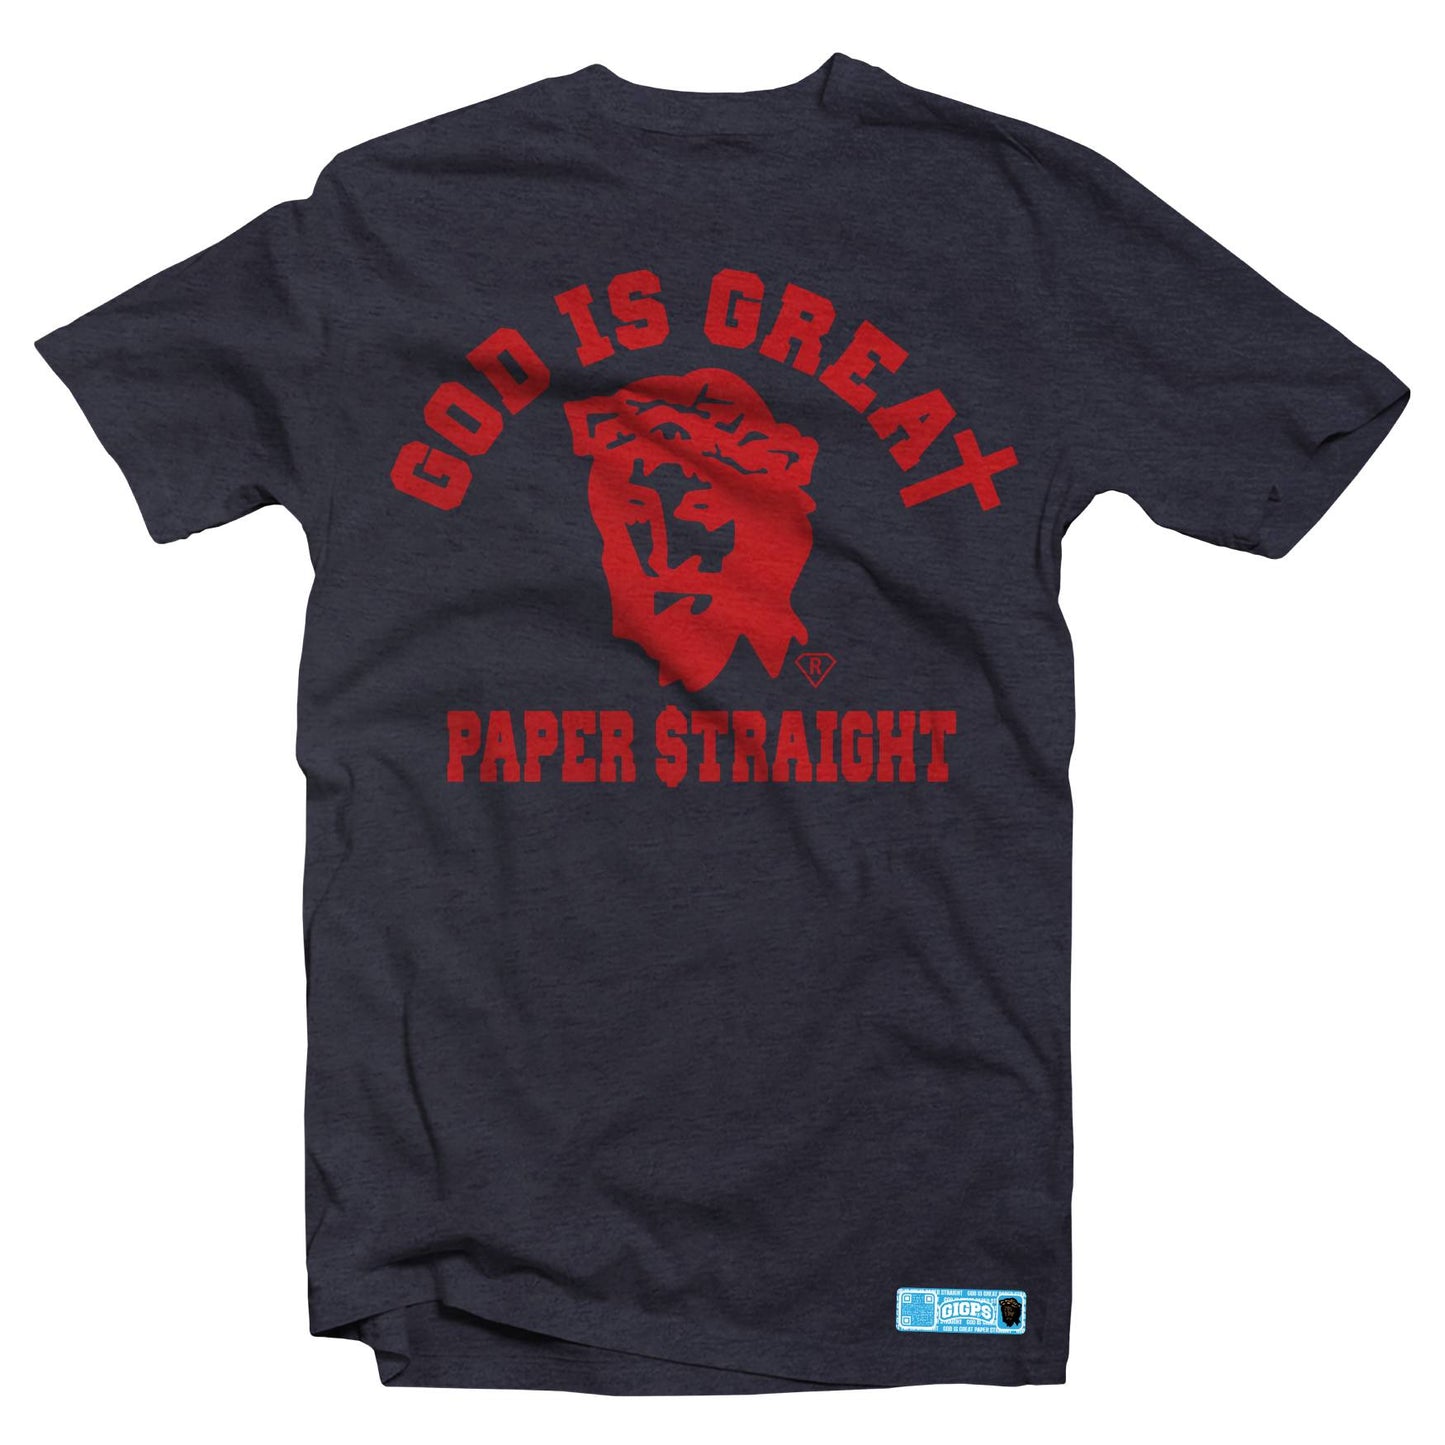 CLASSIC GIGPS RED STORM TEE